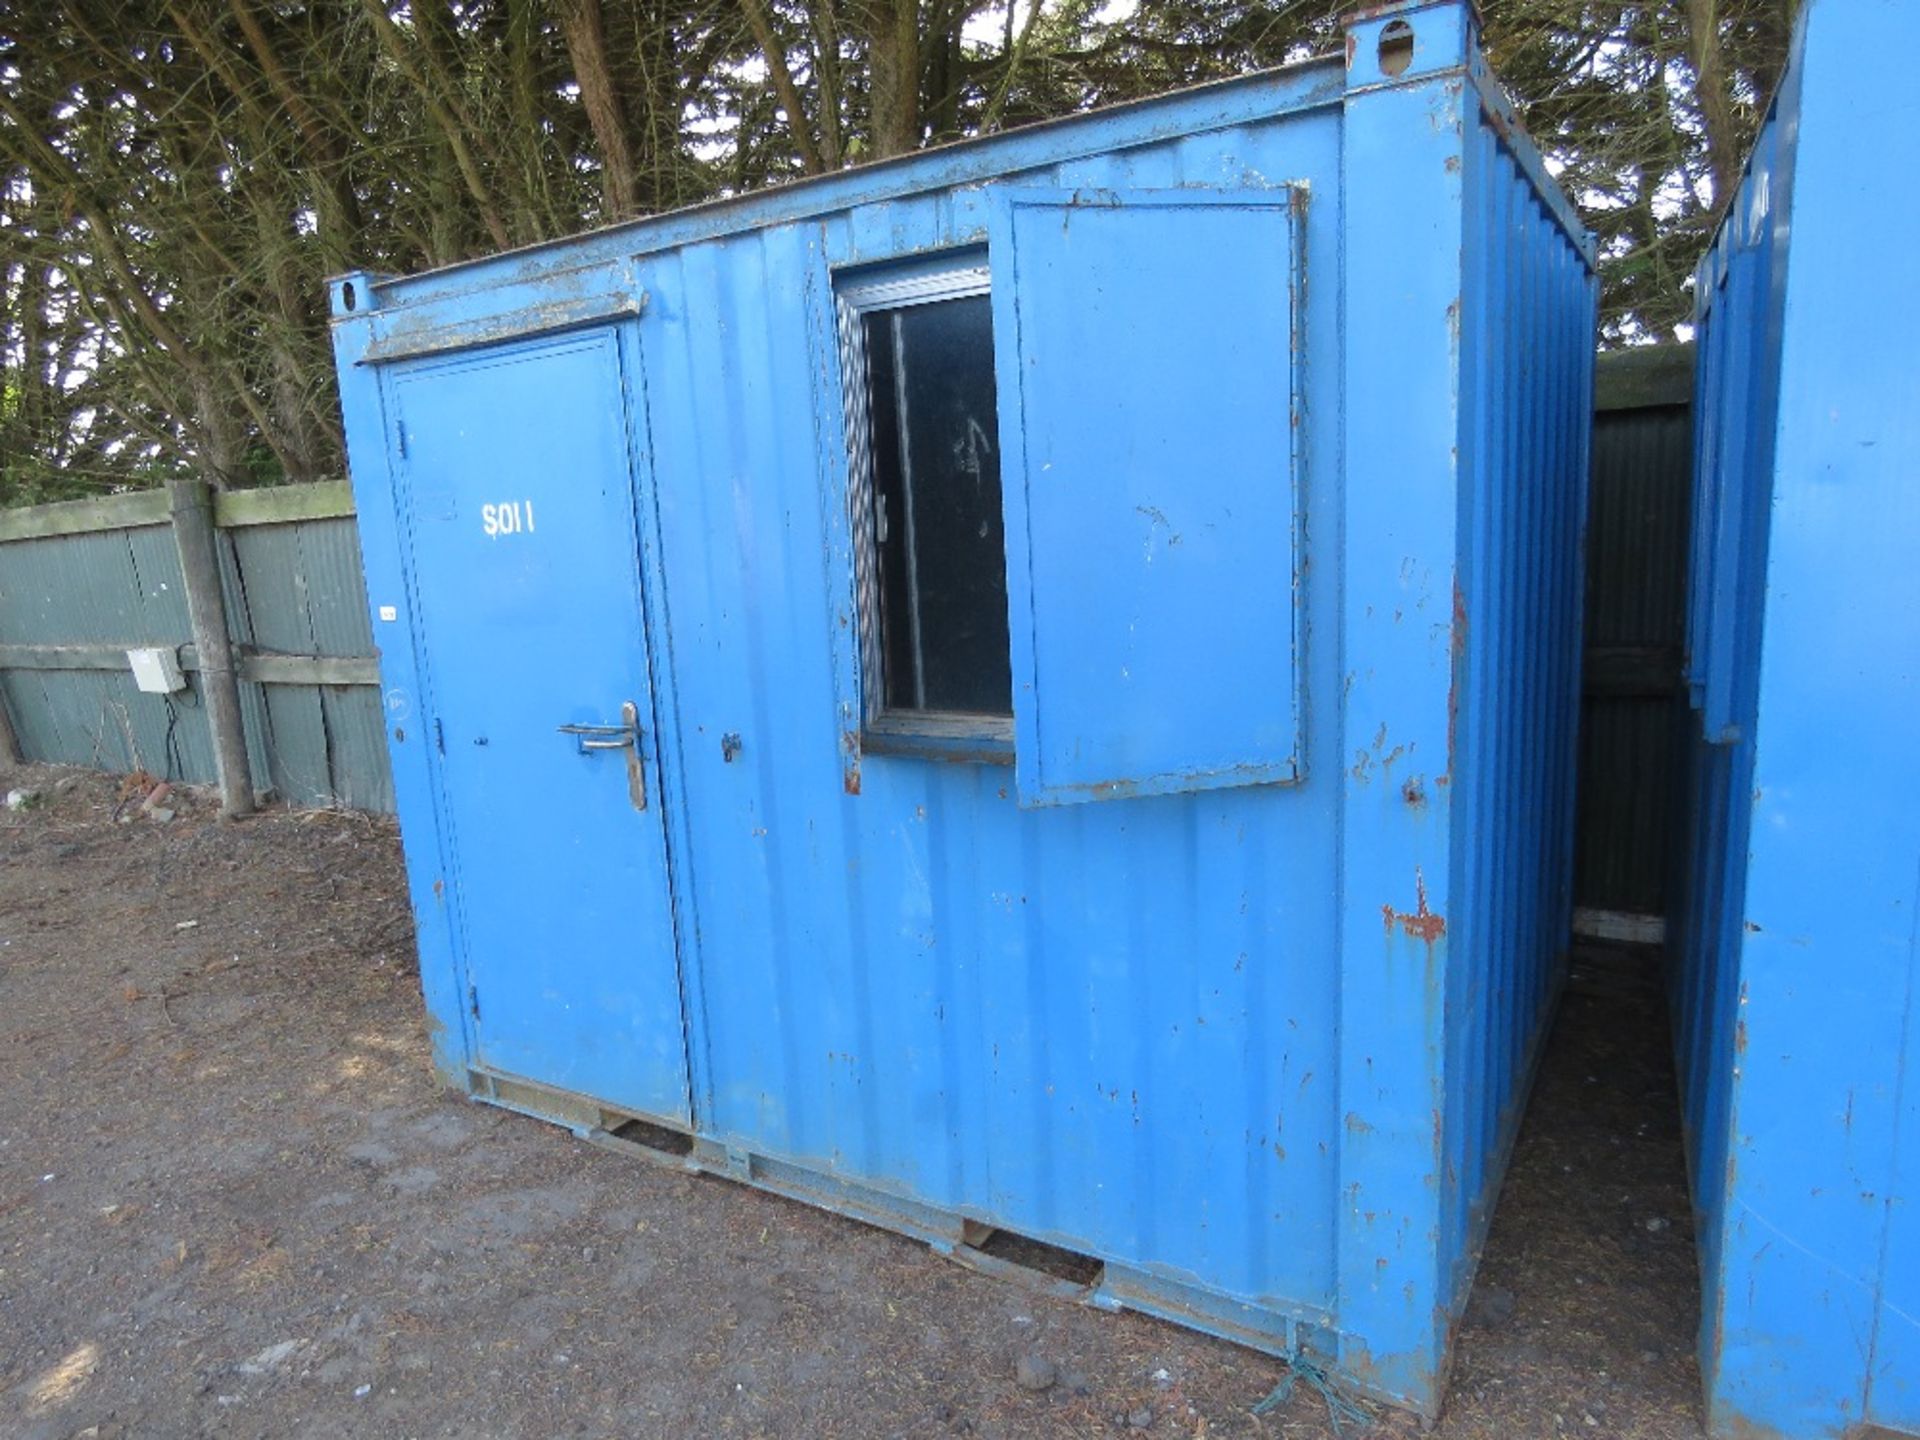 SECURE SITE OFFICE WITH KEY. 10FT X 8FT APPROX. SO11. - Image 2 of 3